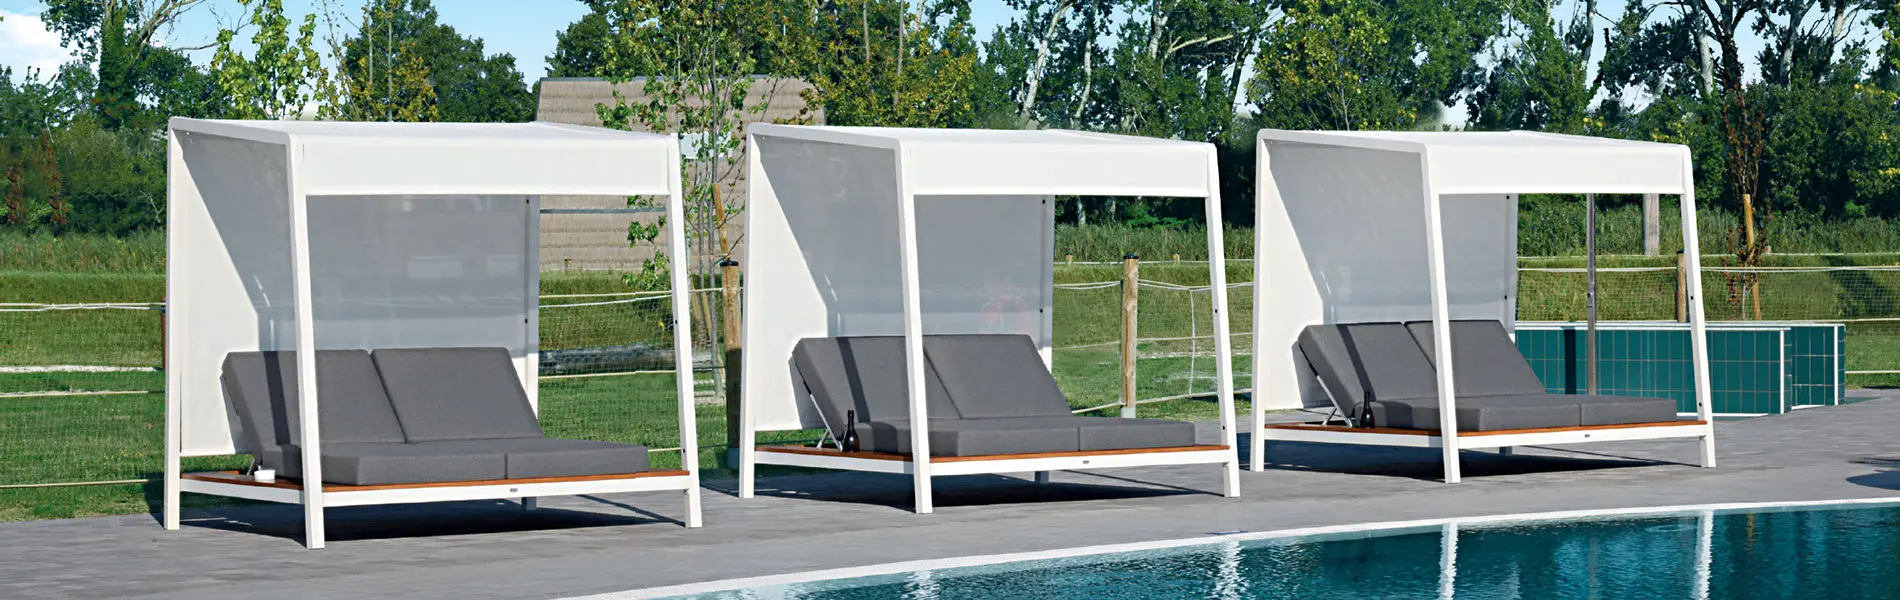 Gazebos: canopy sunloungers with structures